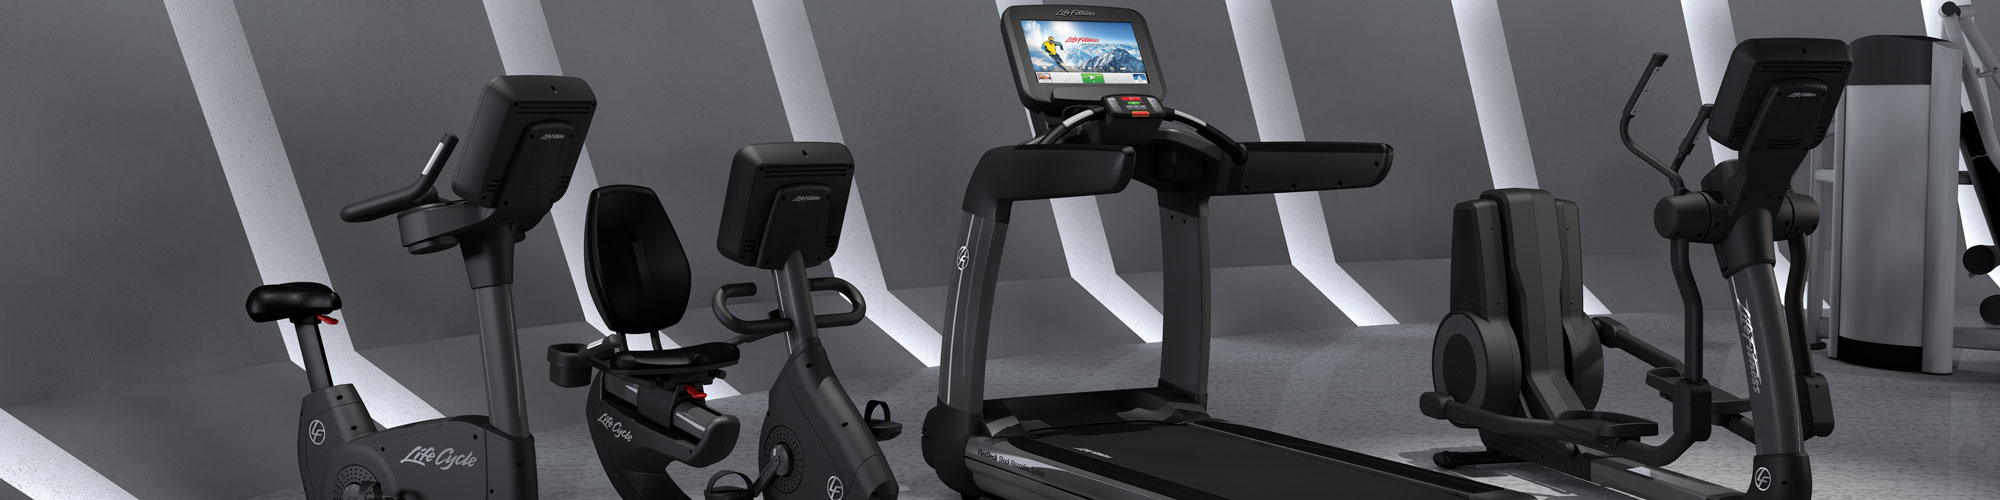 Commercial grade exercise bike, treadmill and cross trainer